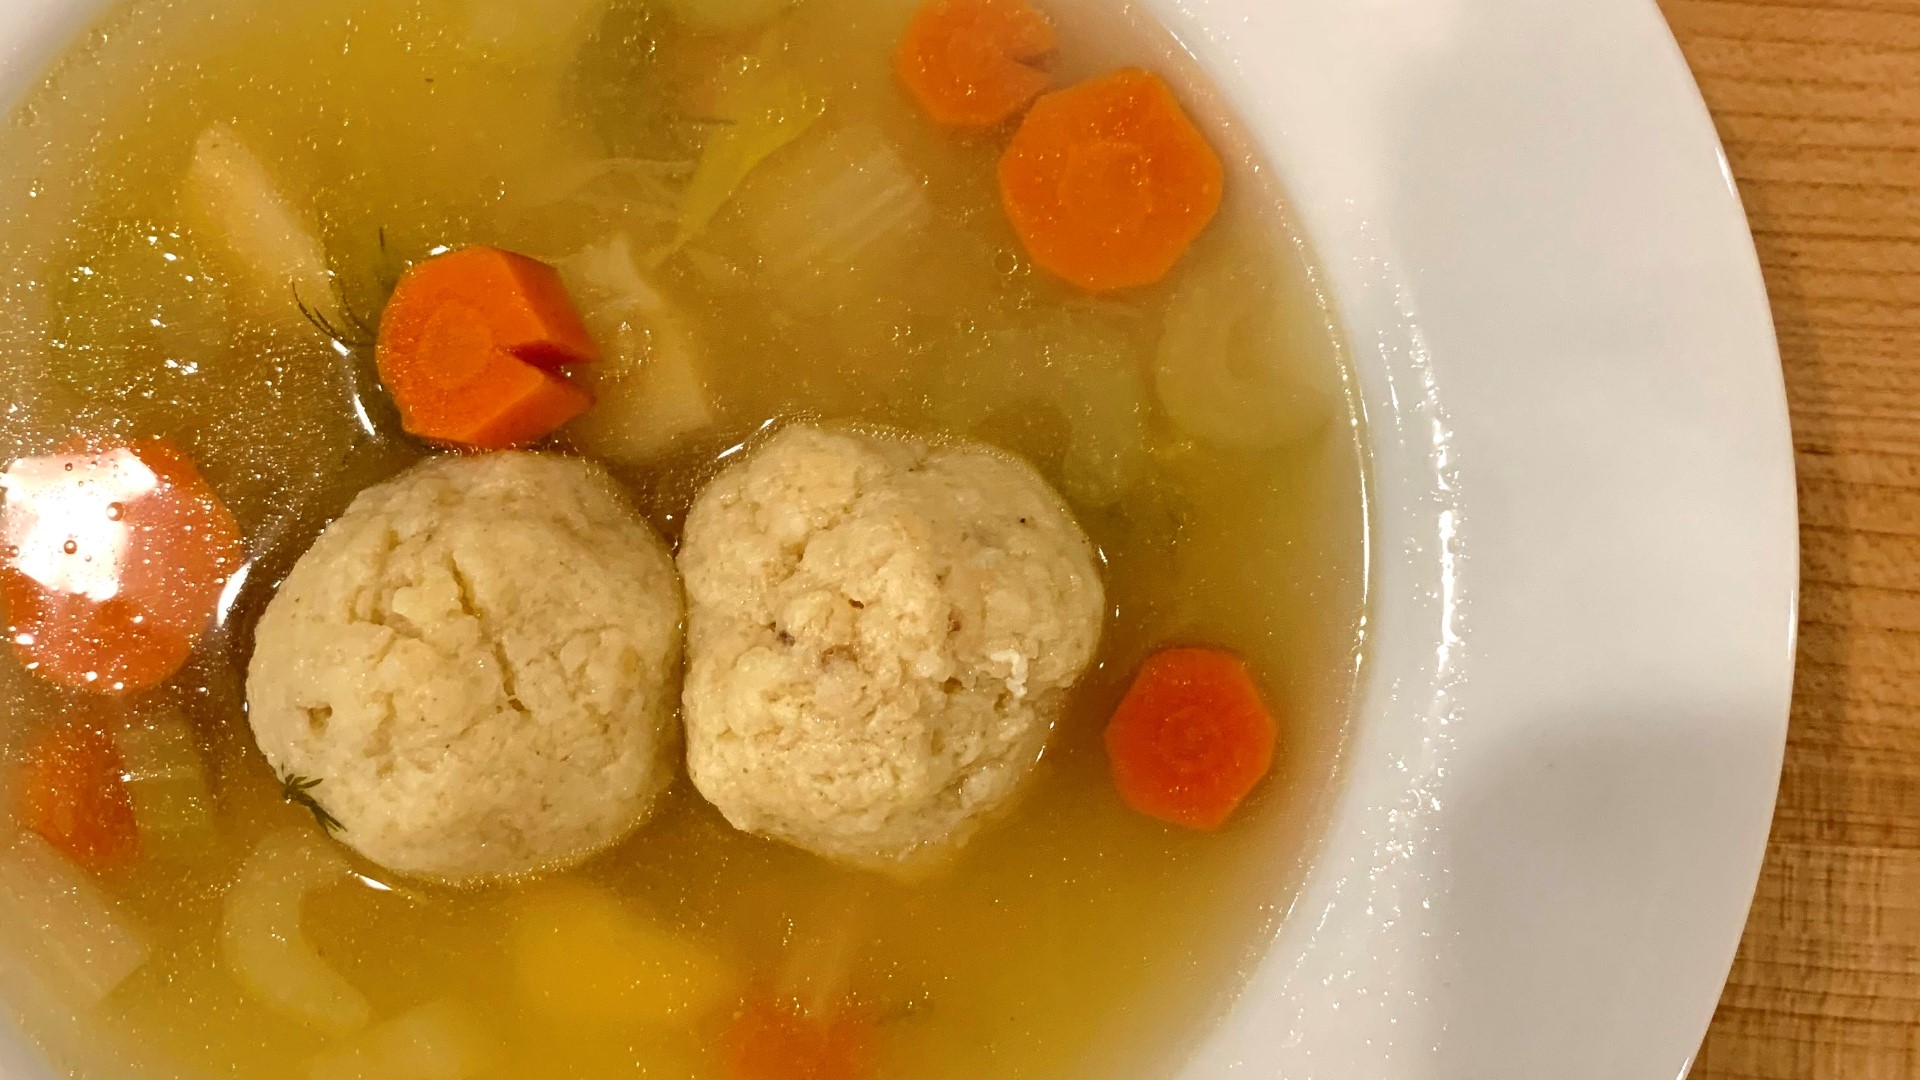 Jewish Passover is celebrated with special foods, including Matzo Ball soup. KIRO's Rachel Belle makes it like her mother Barbara, with some dill and love. #newdaynw